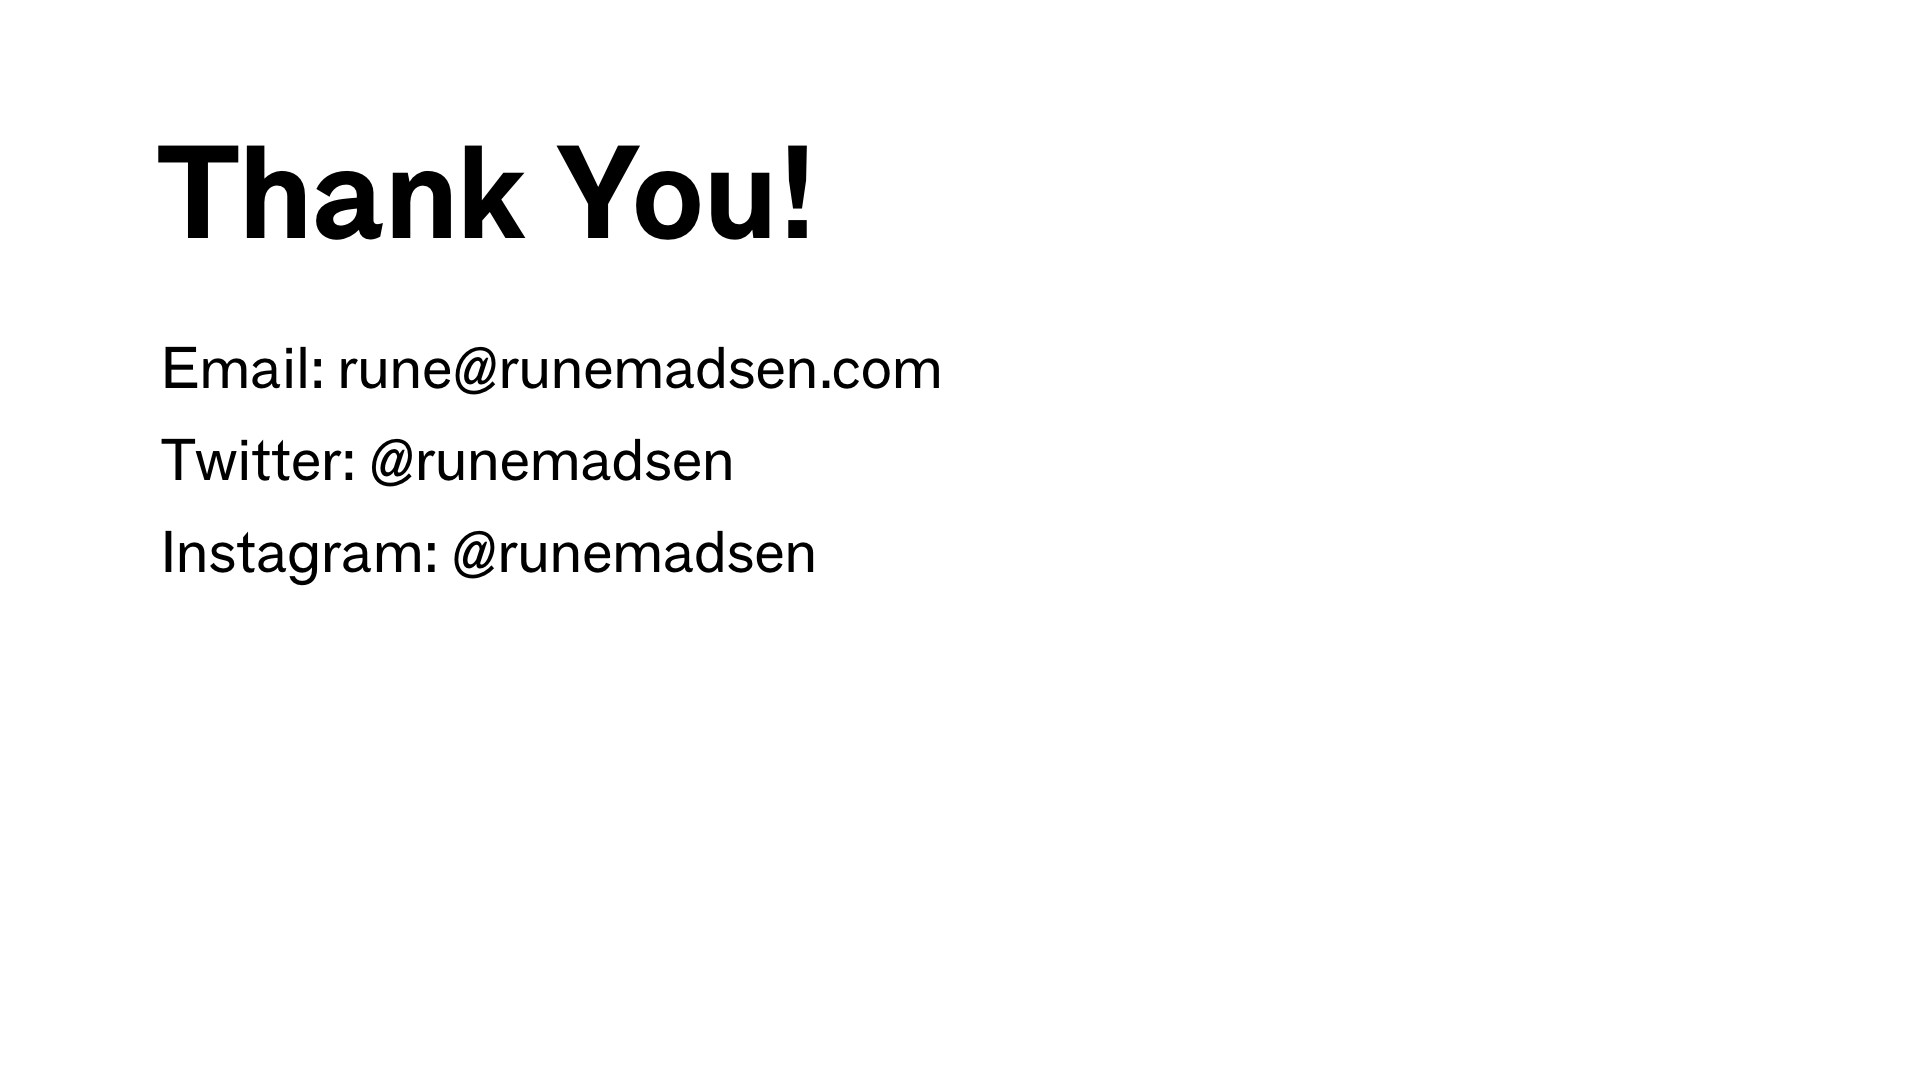 Last slide that says Thank you! and Rune's contact information.